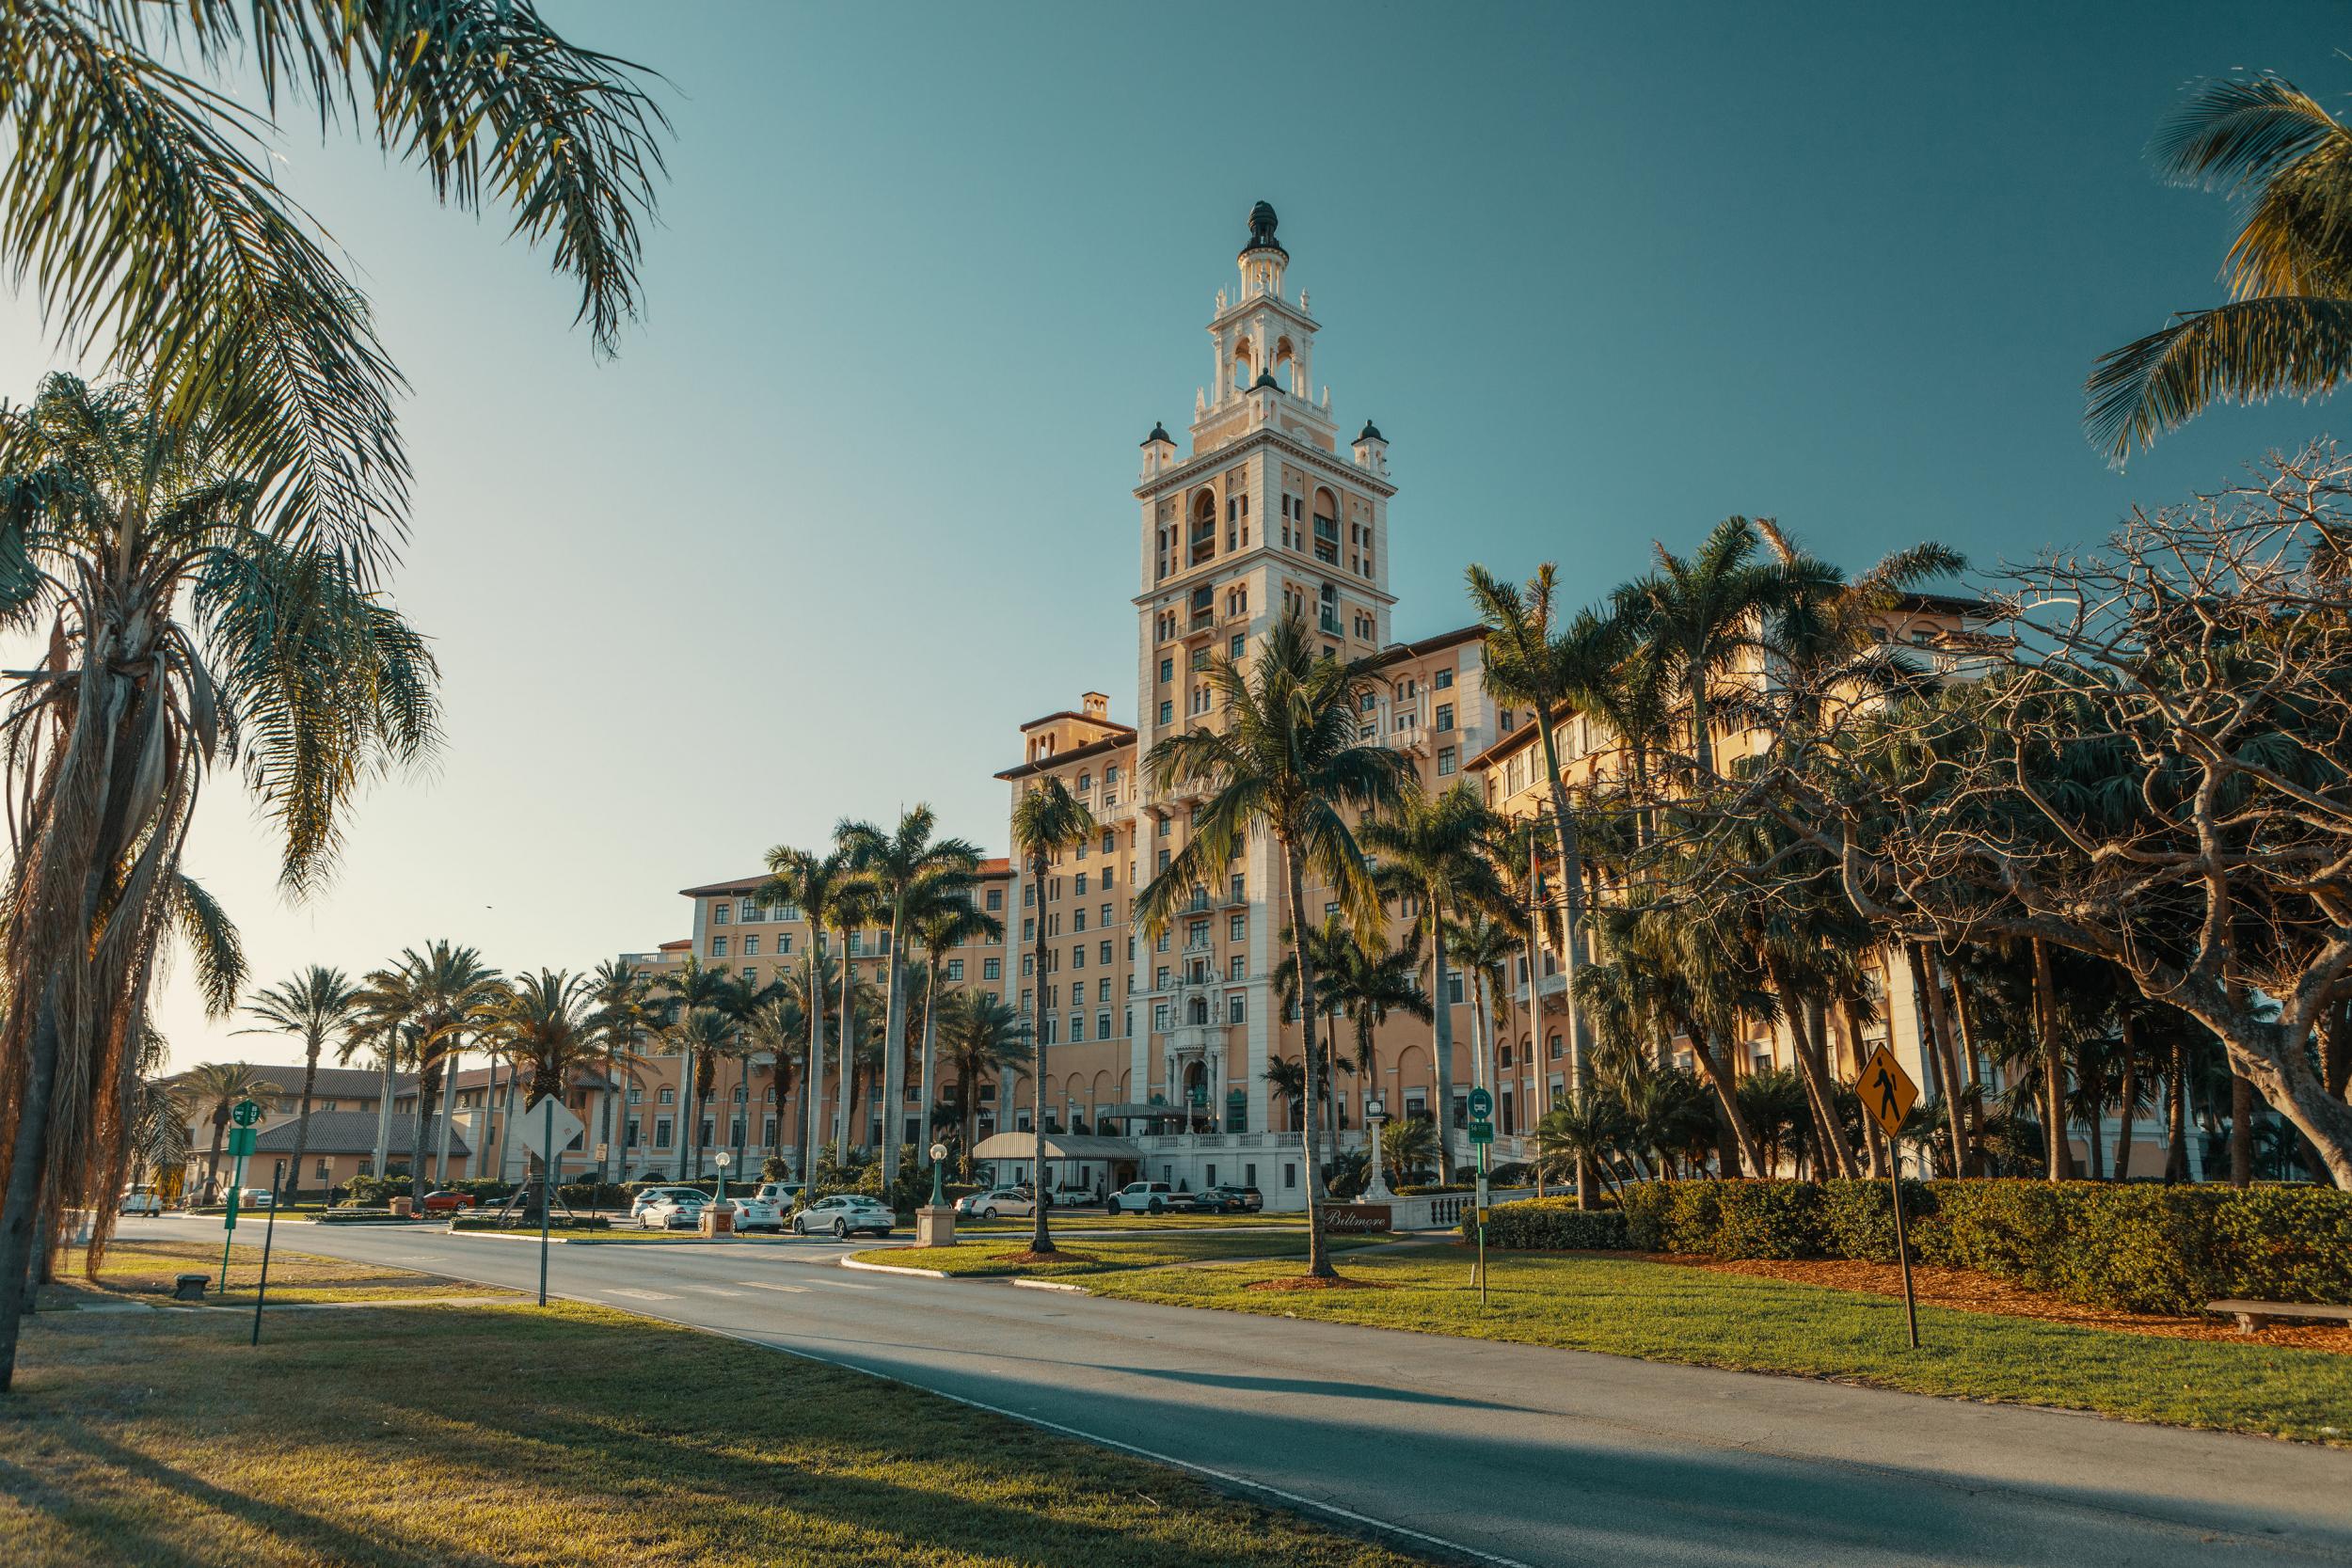 The Biltmore is the grande dame of Cuban-inspired hotels